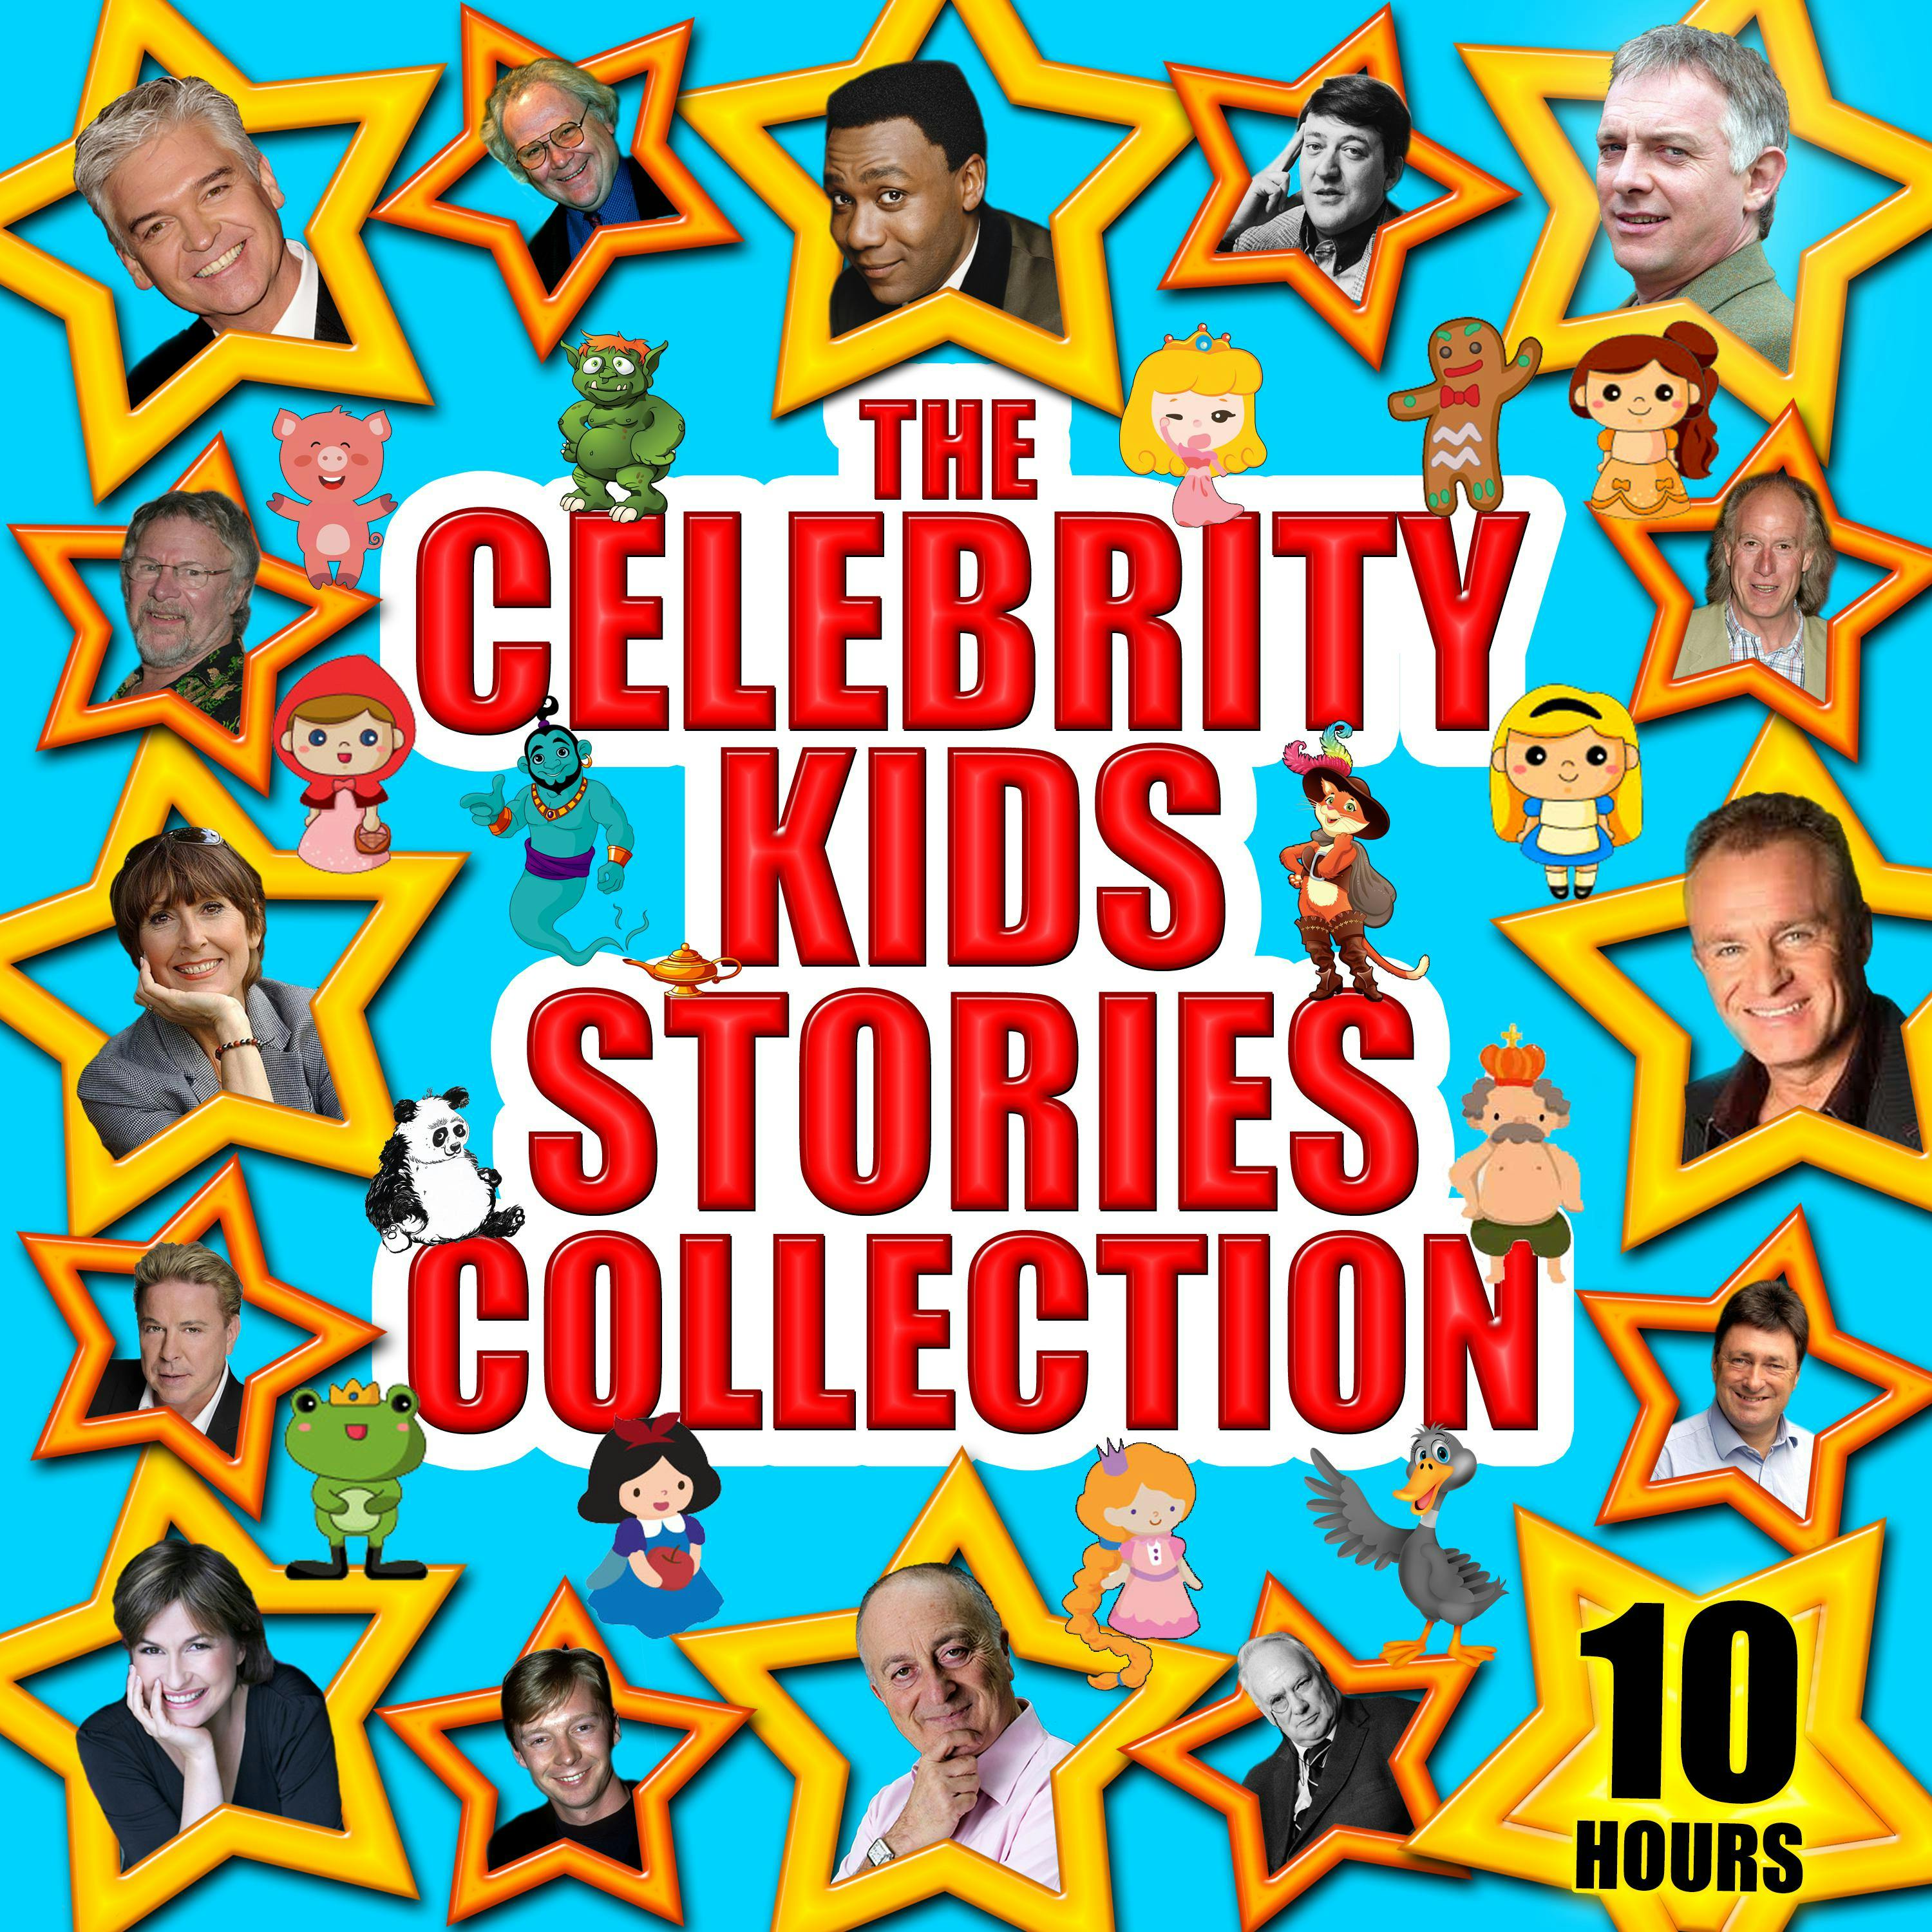 The Celebrity Kids Stories Collection - undefined